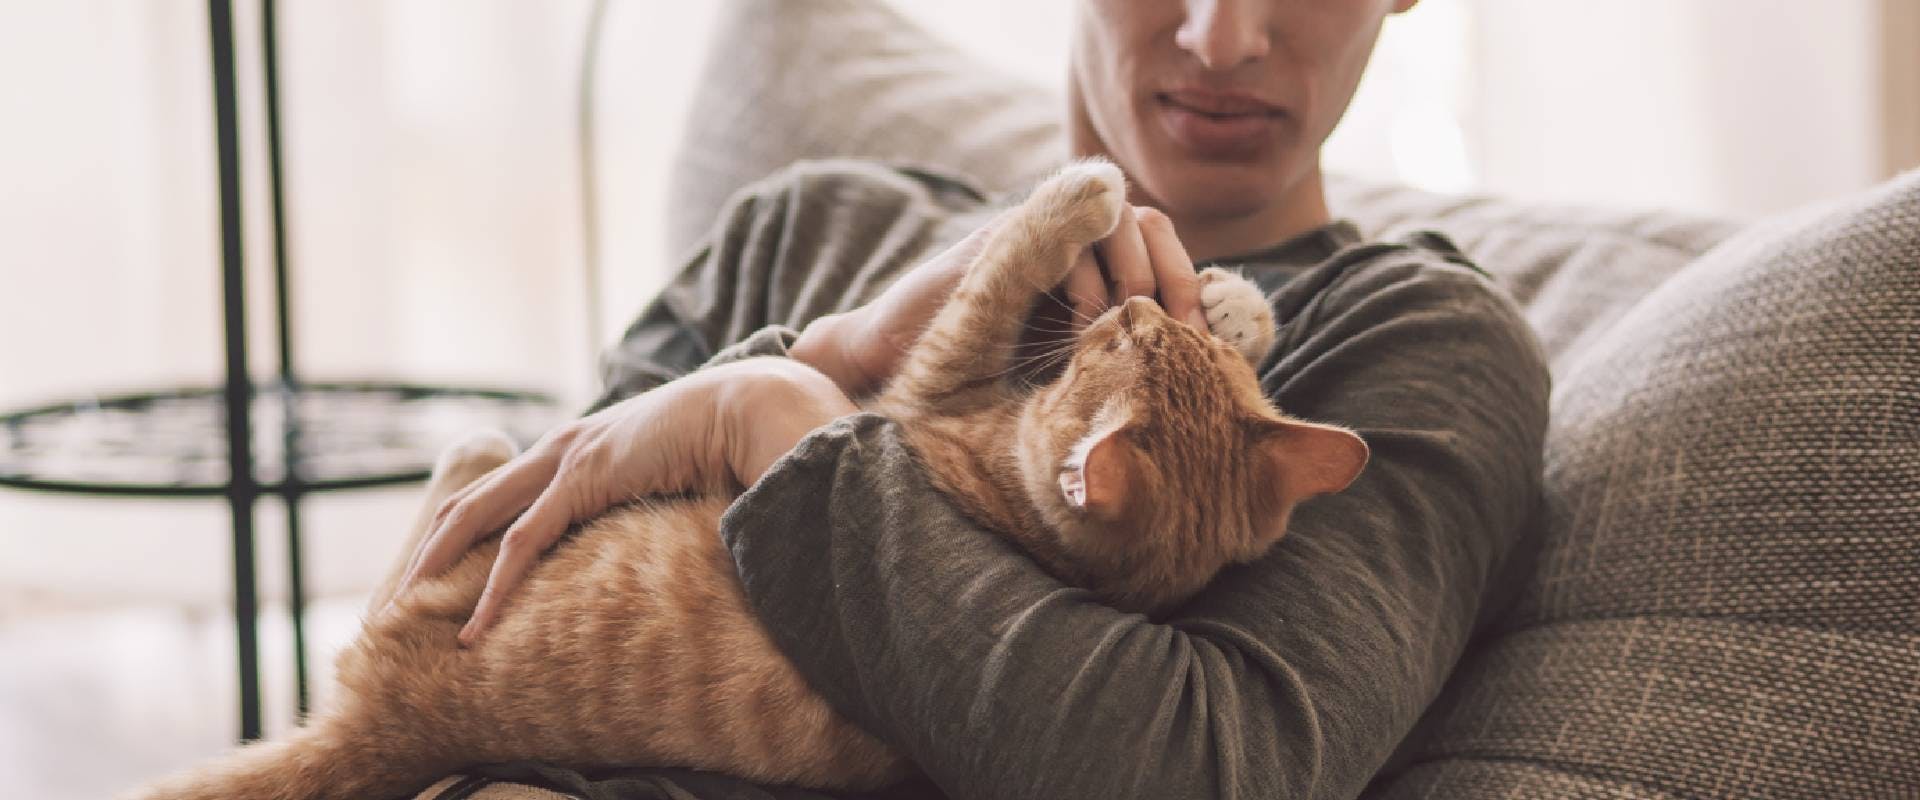 Person holding a ginger cat